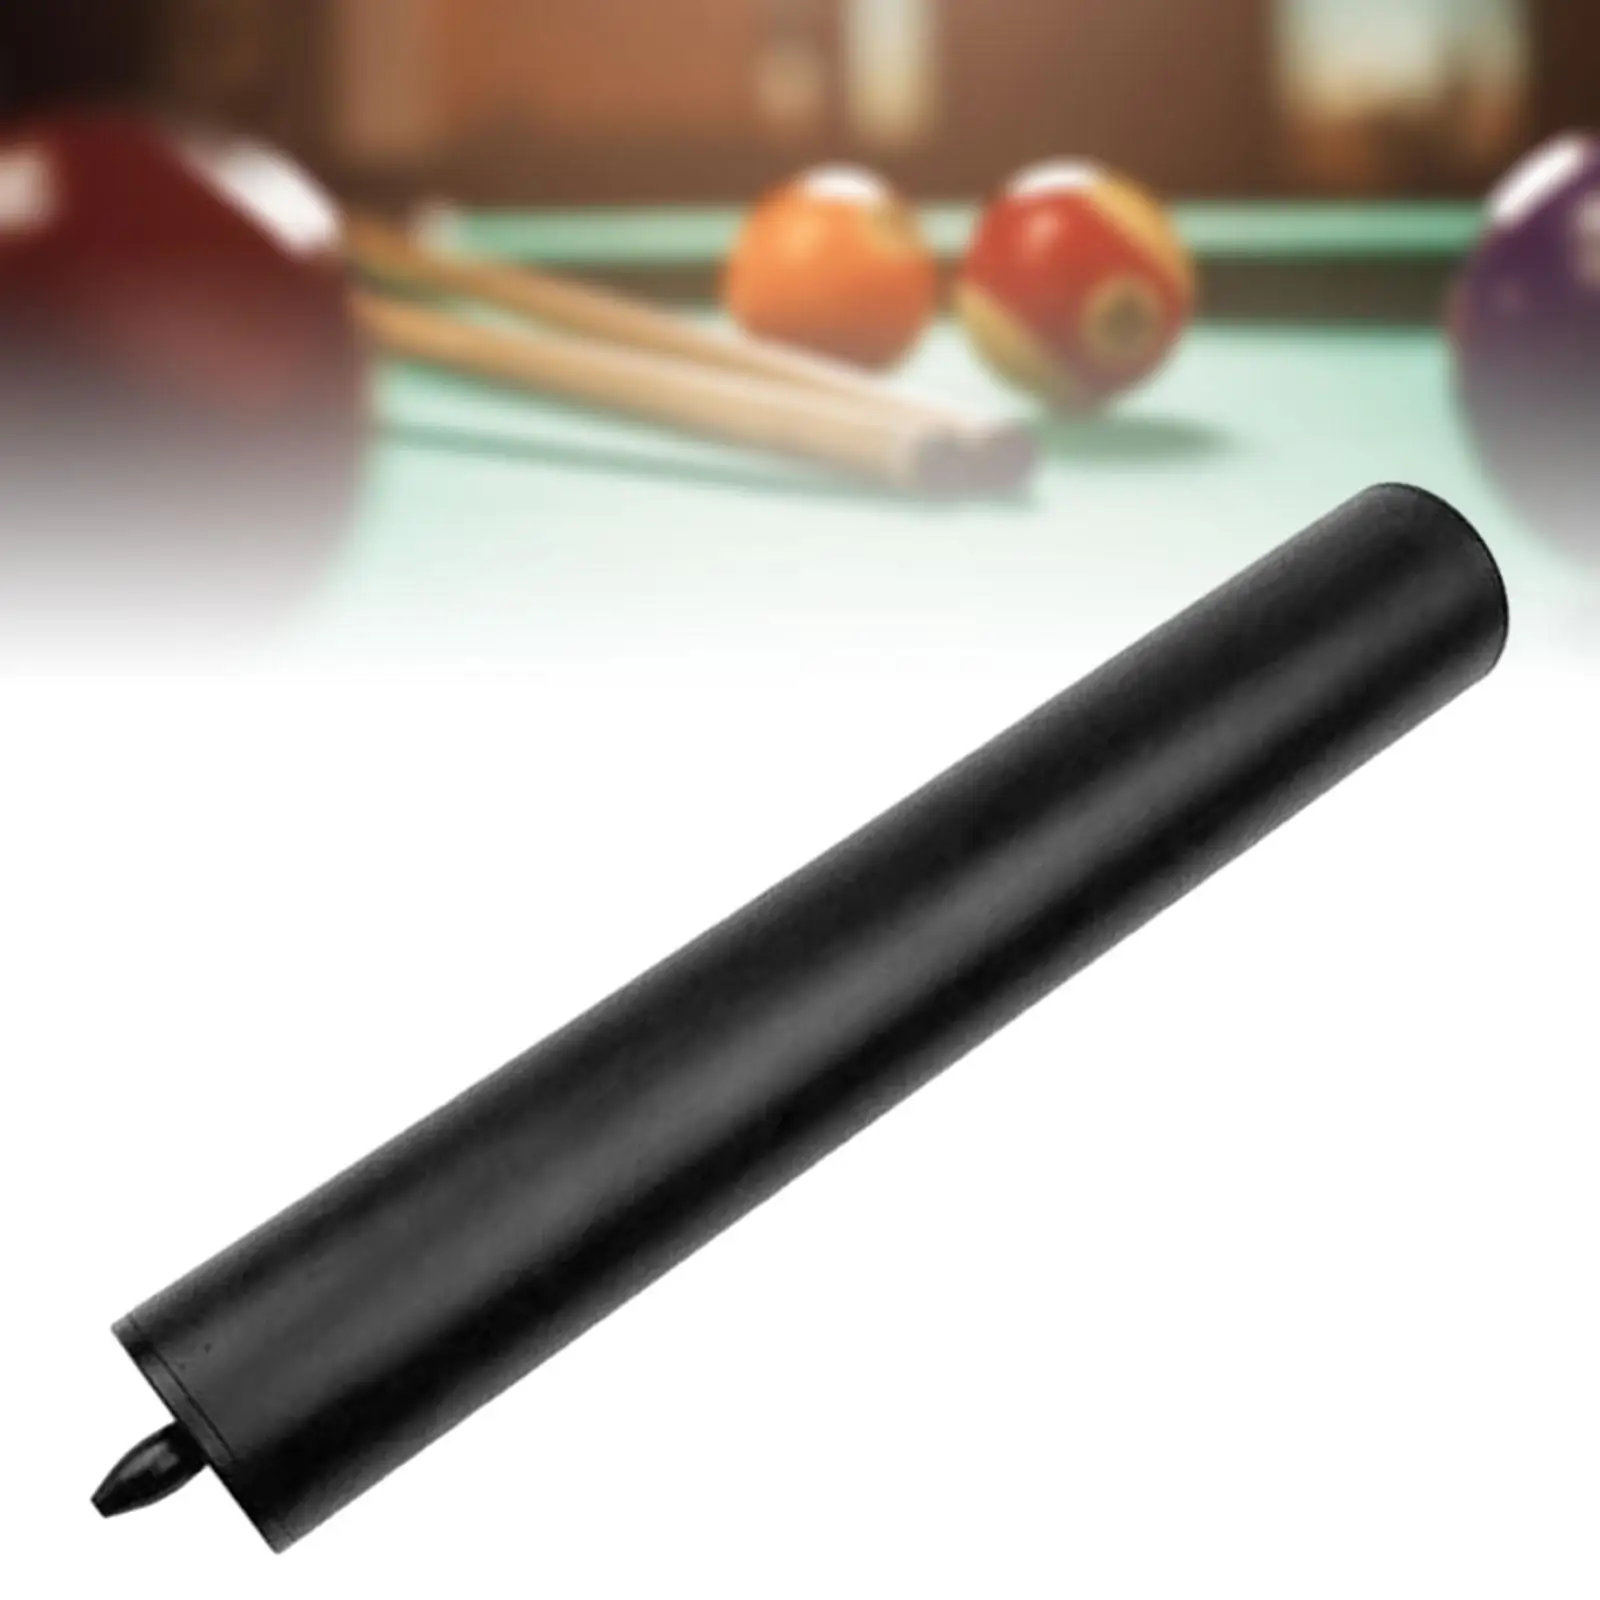 Pool Cue Extender Billiard Cue Extension Ultralight Portable Professional Billiards Snooker Cue Extension for Snooker Athlete